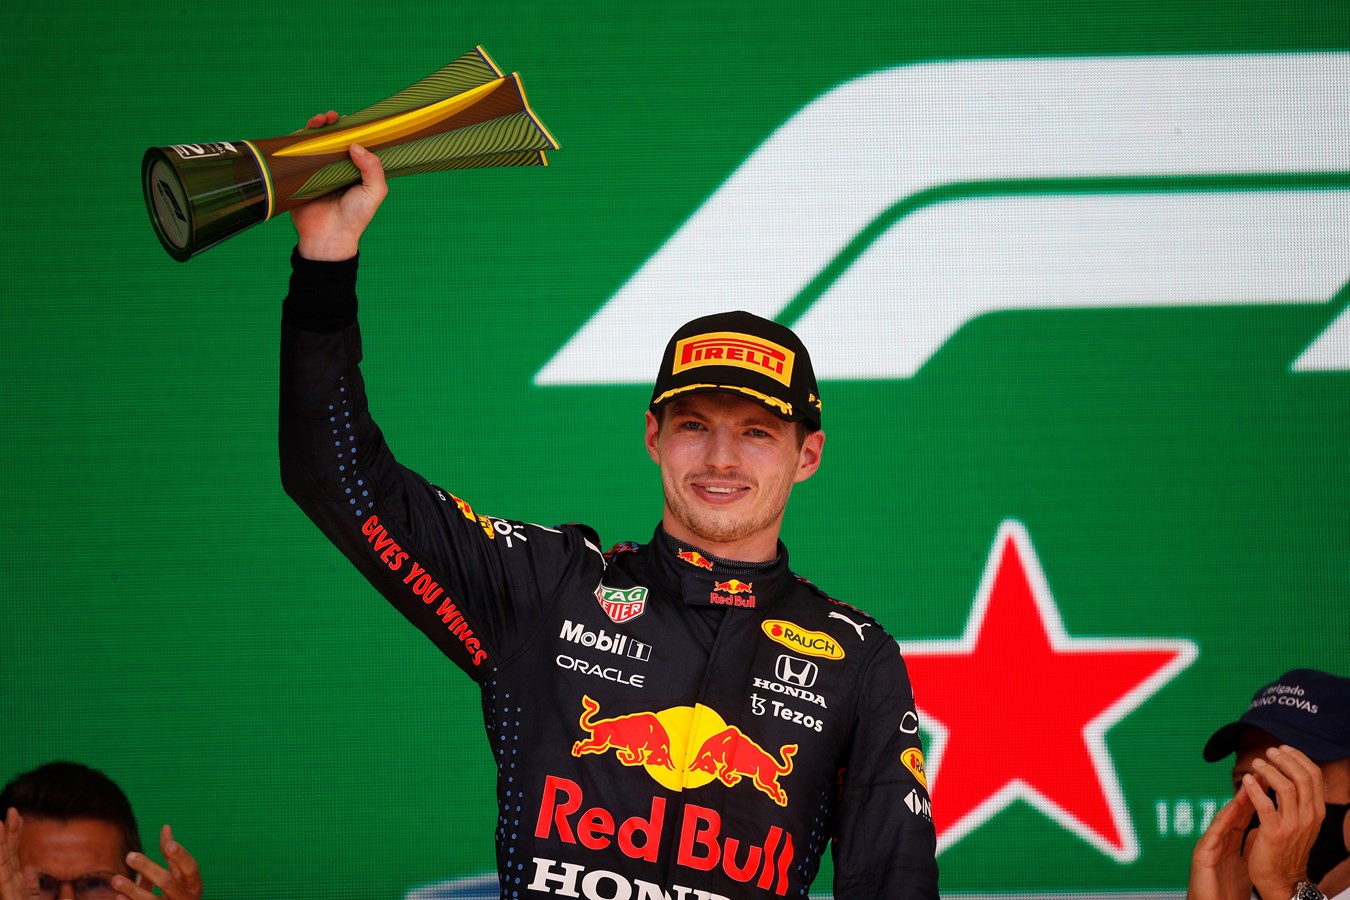 Max Holds His Championship Lead, Finishing 2nd In Brazil